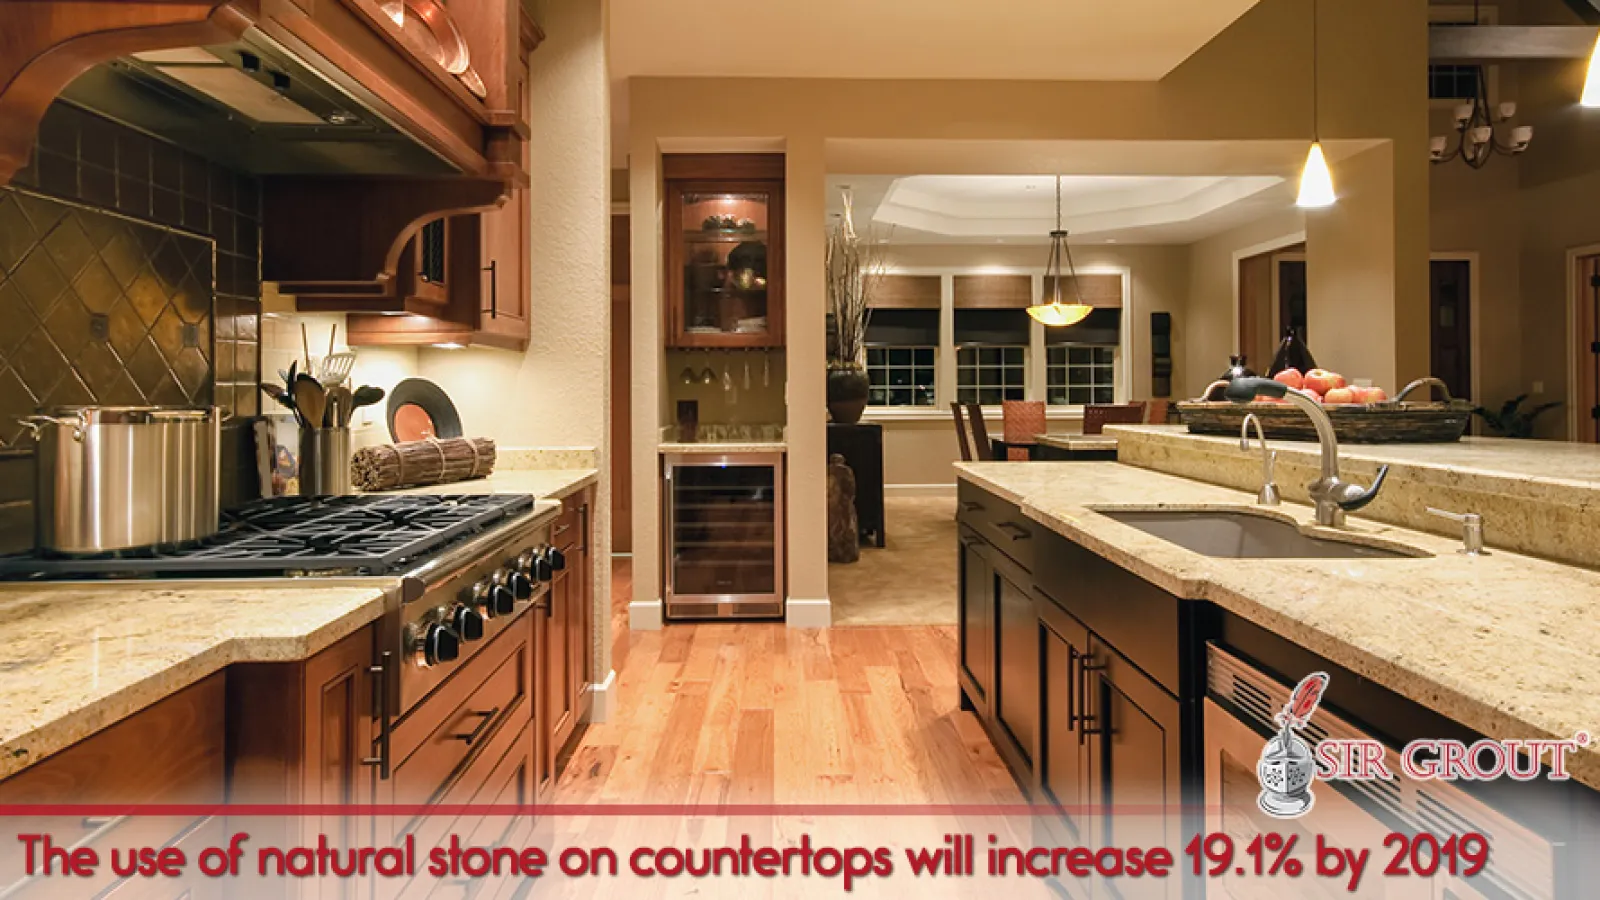 The Increasing Demand for Natural Stone Countertops Provides Great Opportunities for a Sir Grout Franchise